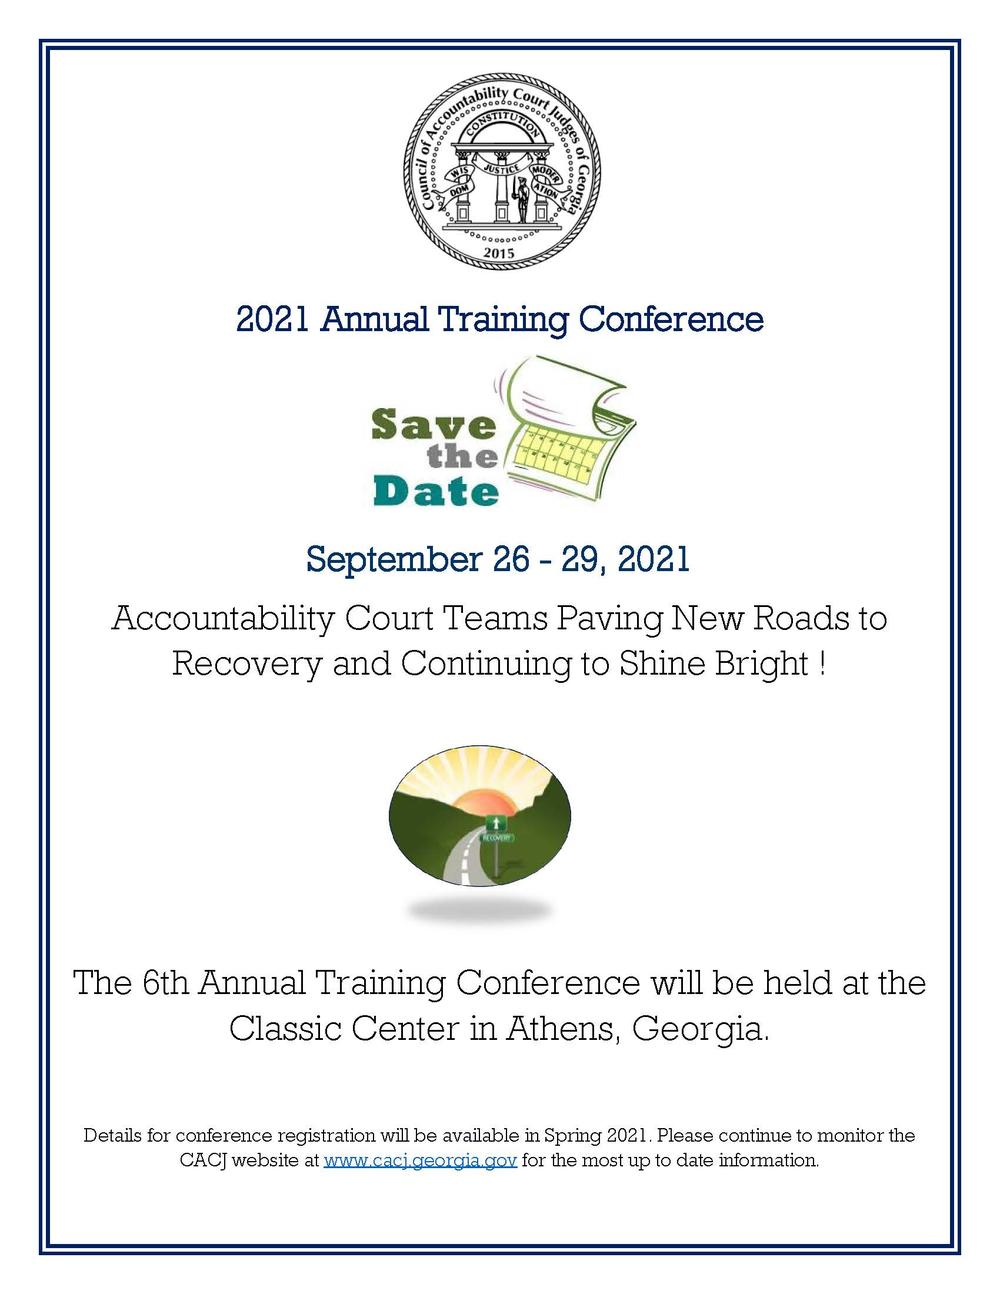 2021 Annual Training Conference Council of Accountability Court Judges